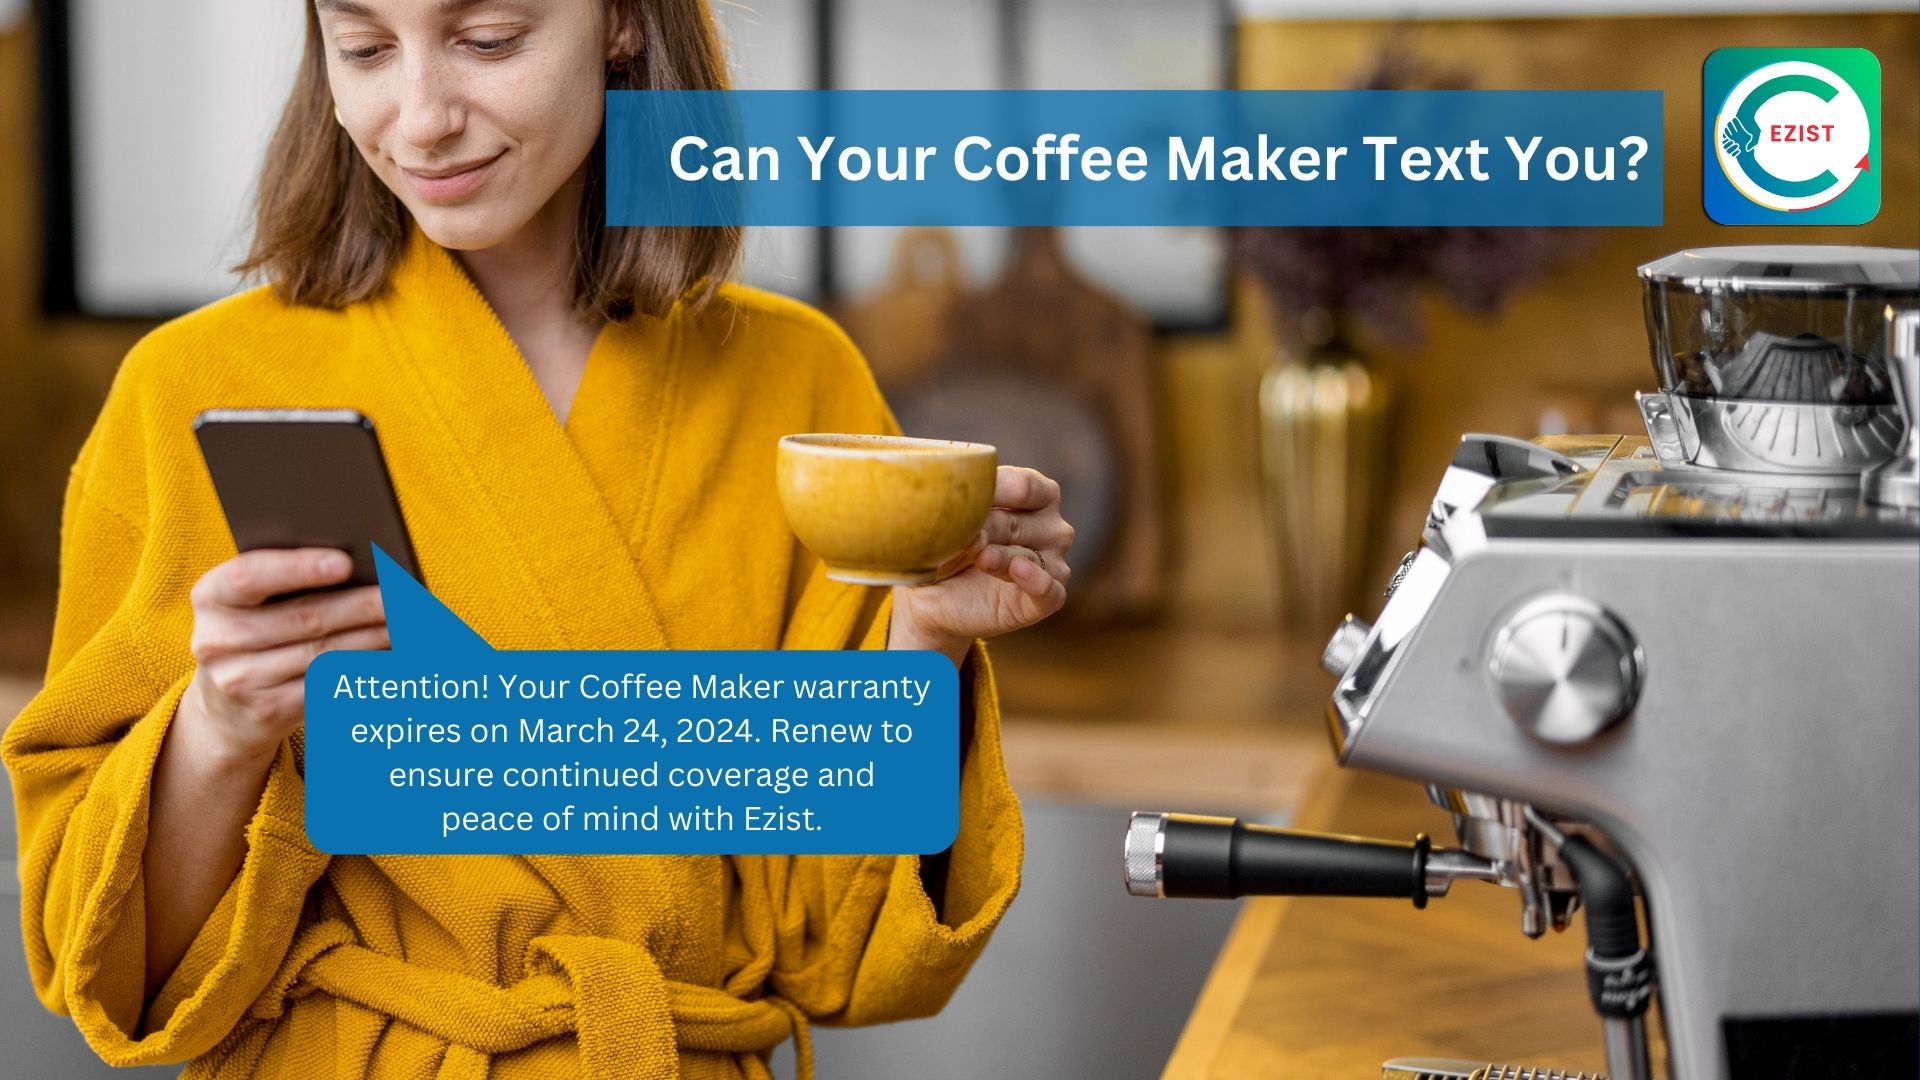 Can Your Coffee Maker Text You? The Future of Home Appliance Management